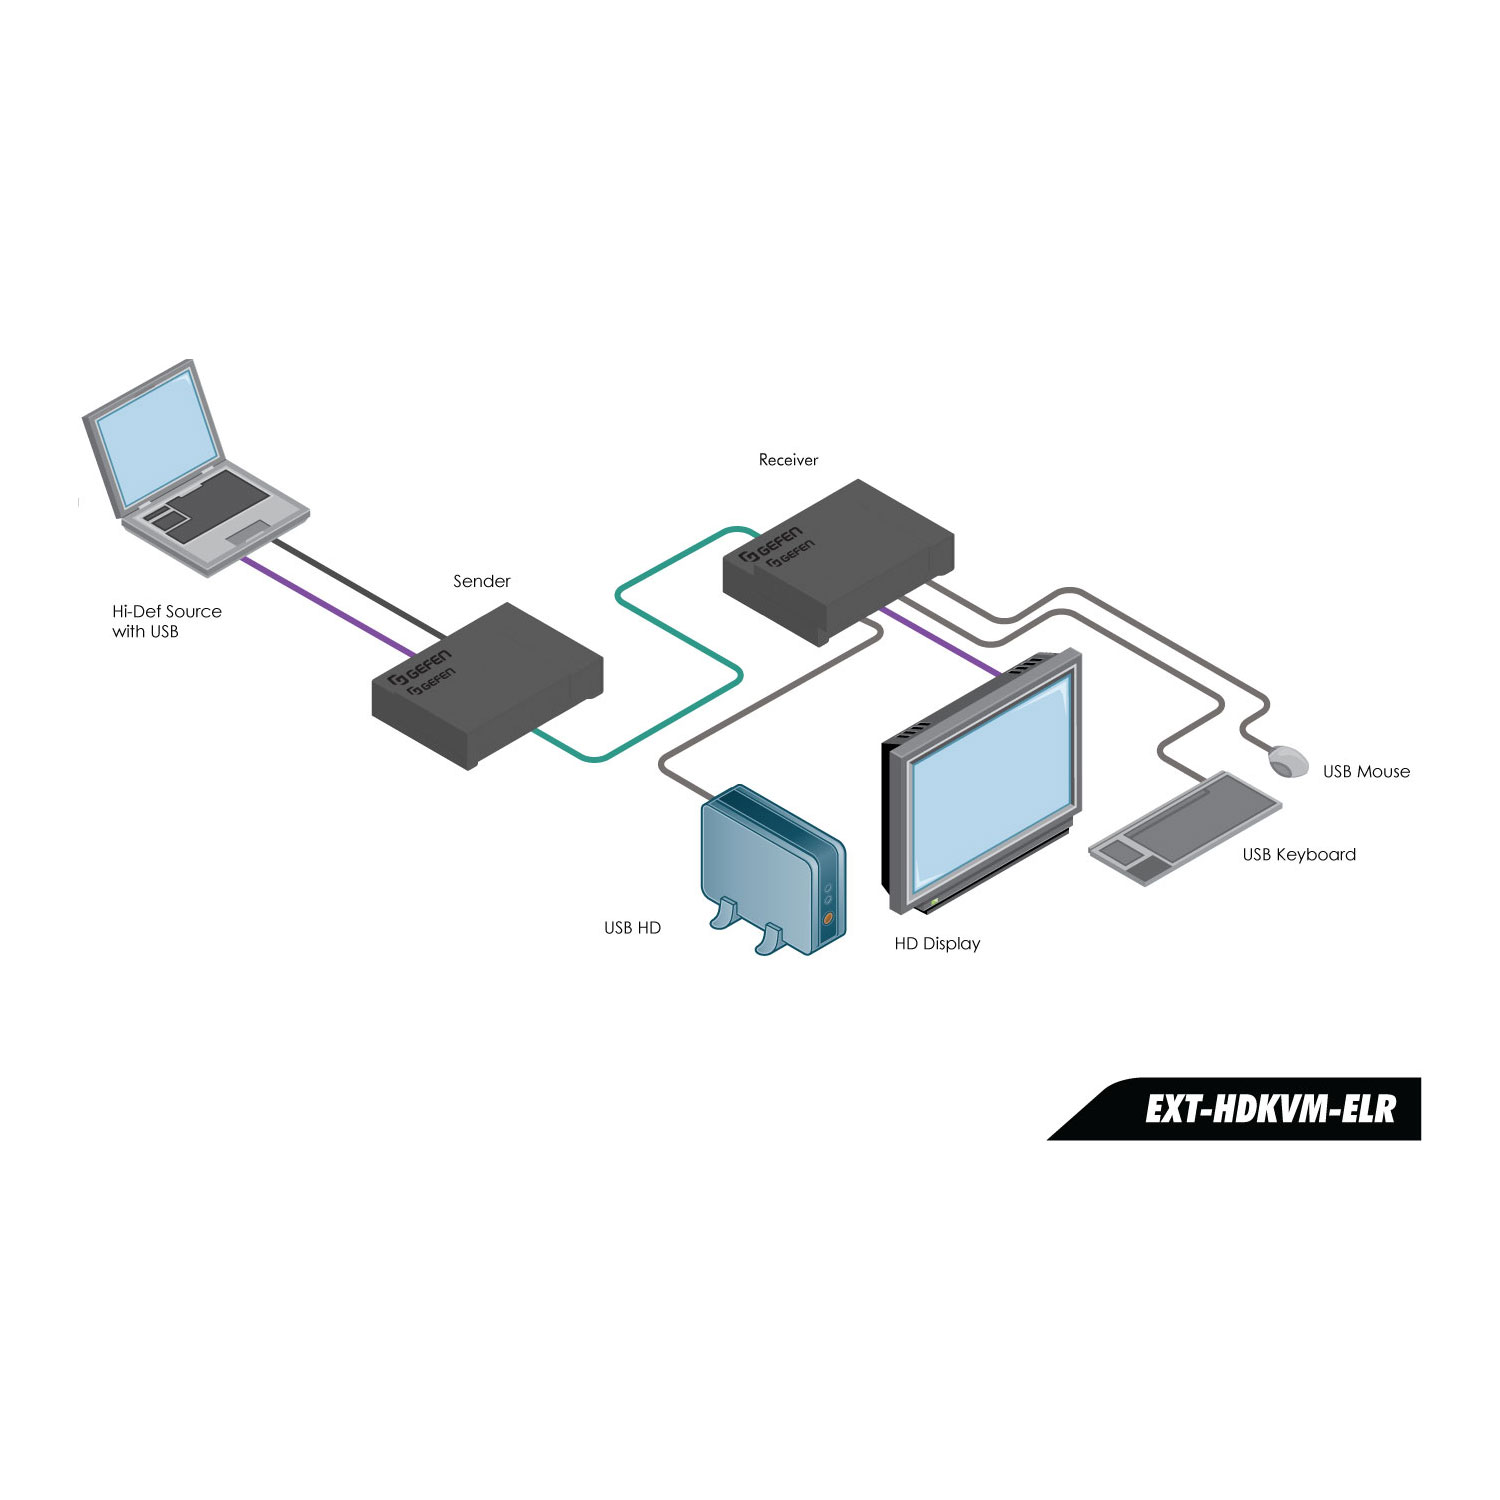 HDKVM ELR Extender for HDMI and USB over One CAT5 | Gefen